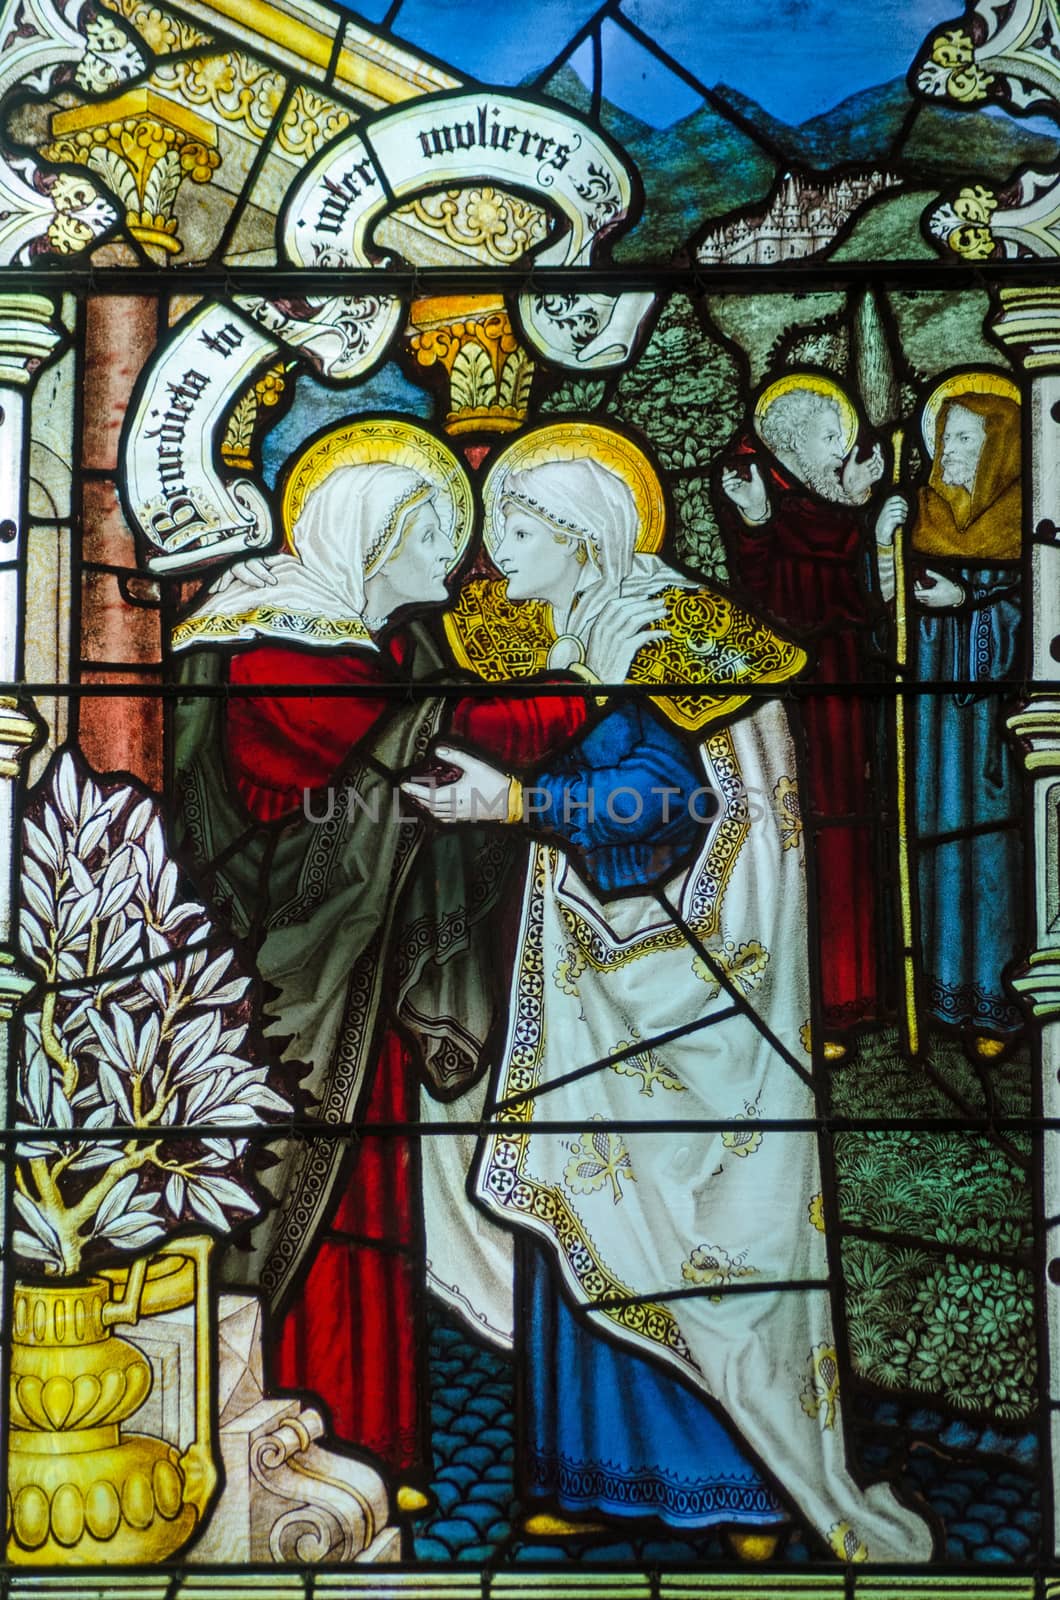 Saints Mary and Martha, Stained Glass Window by BasPhoto